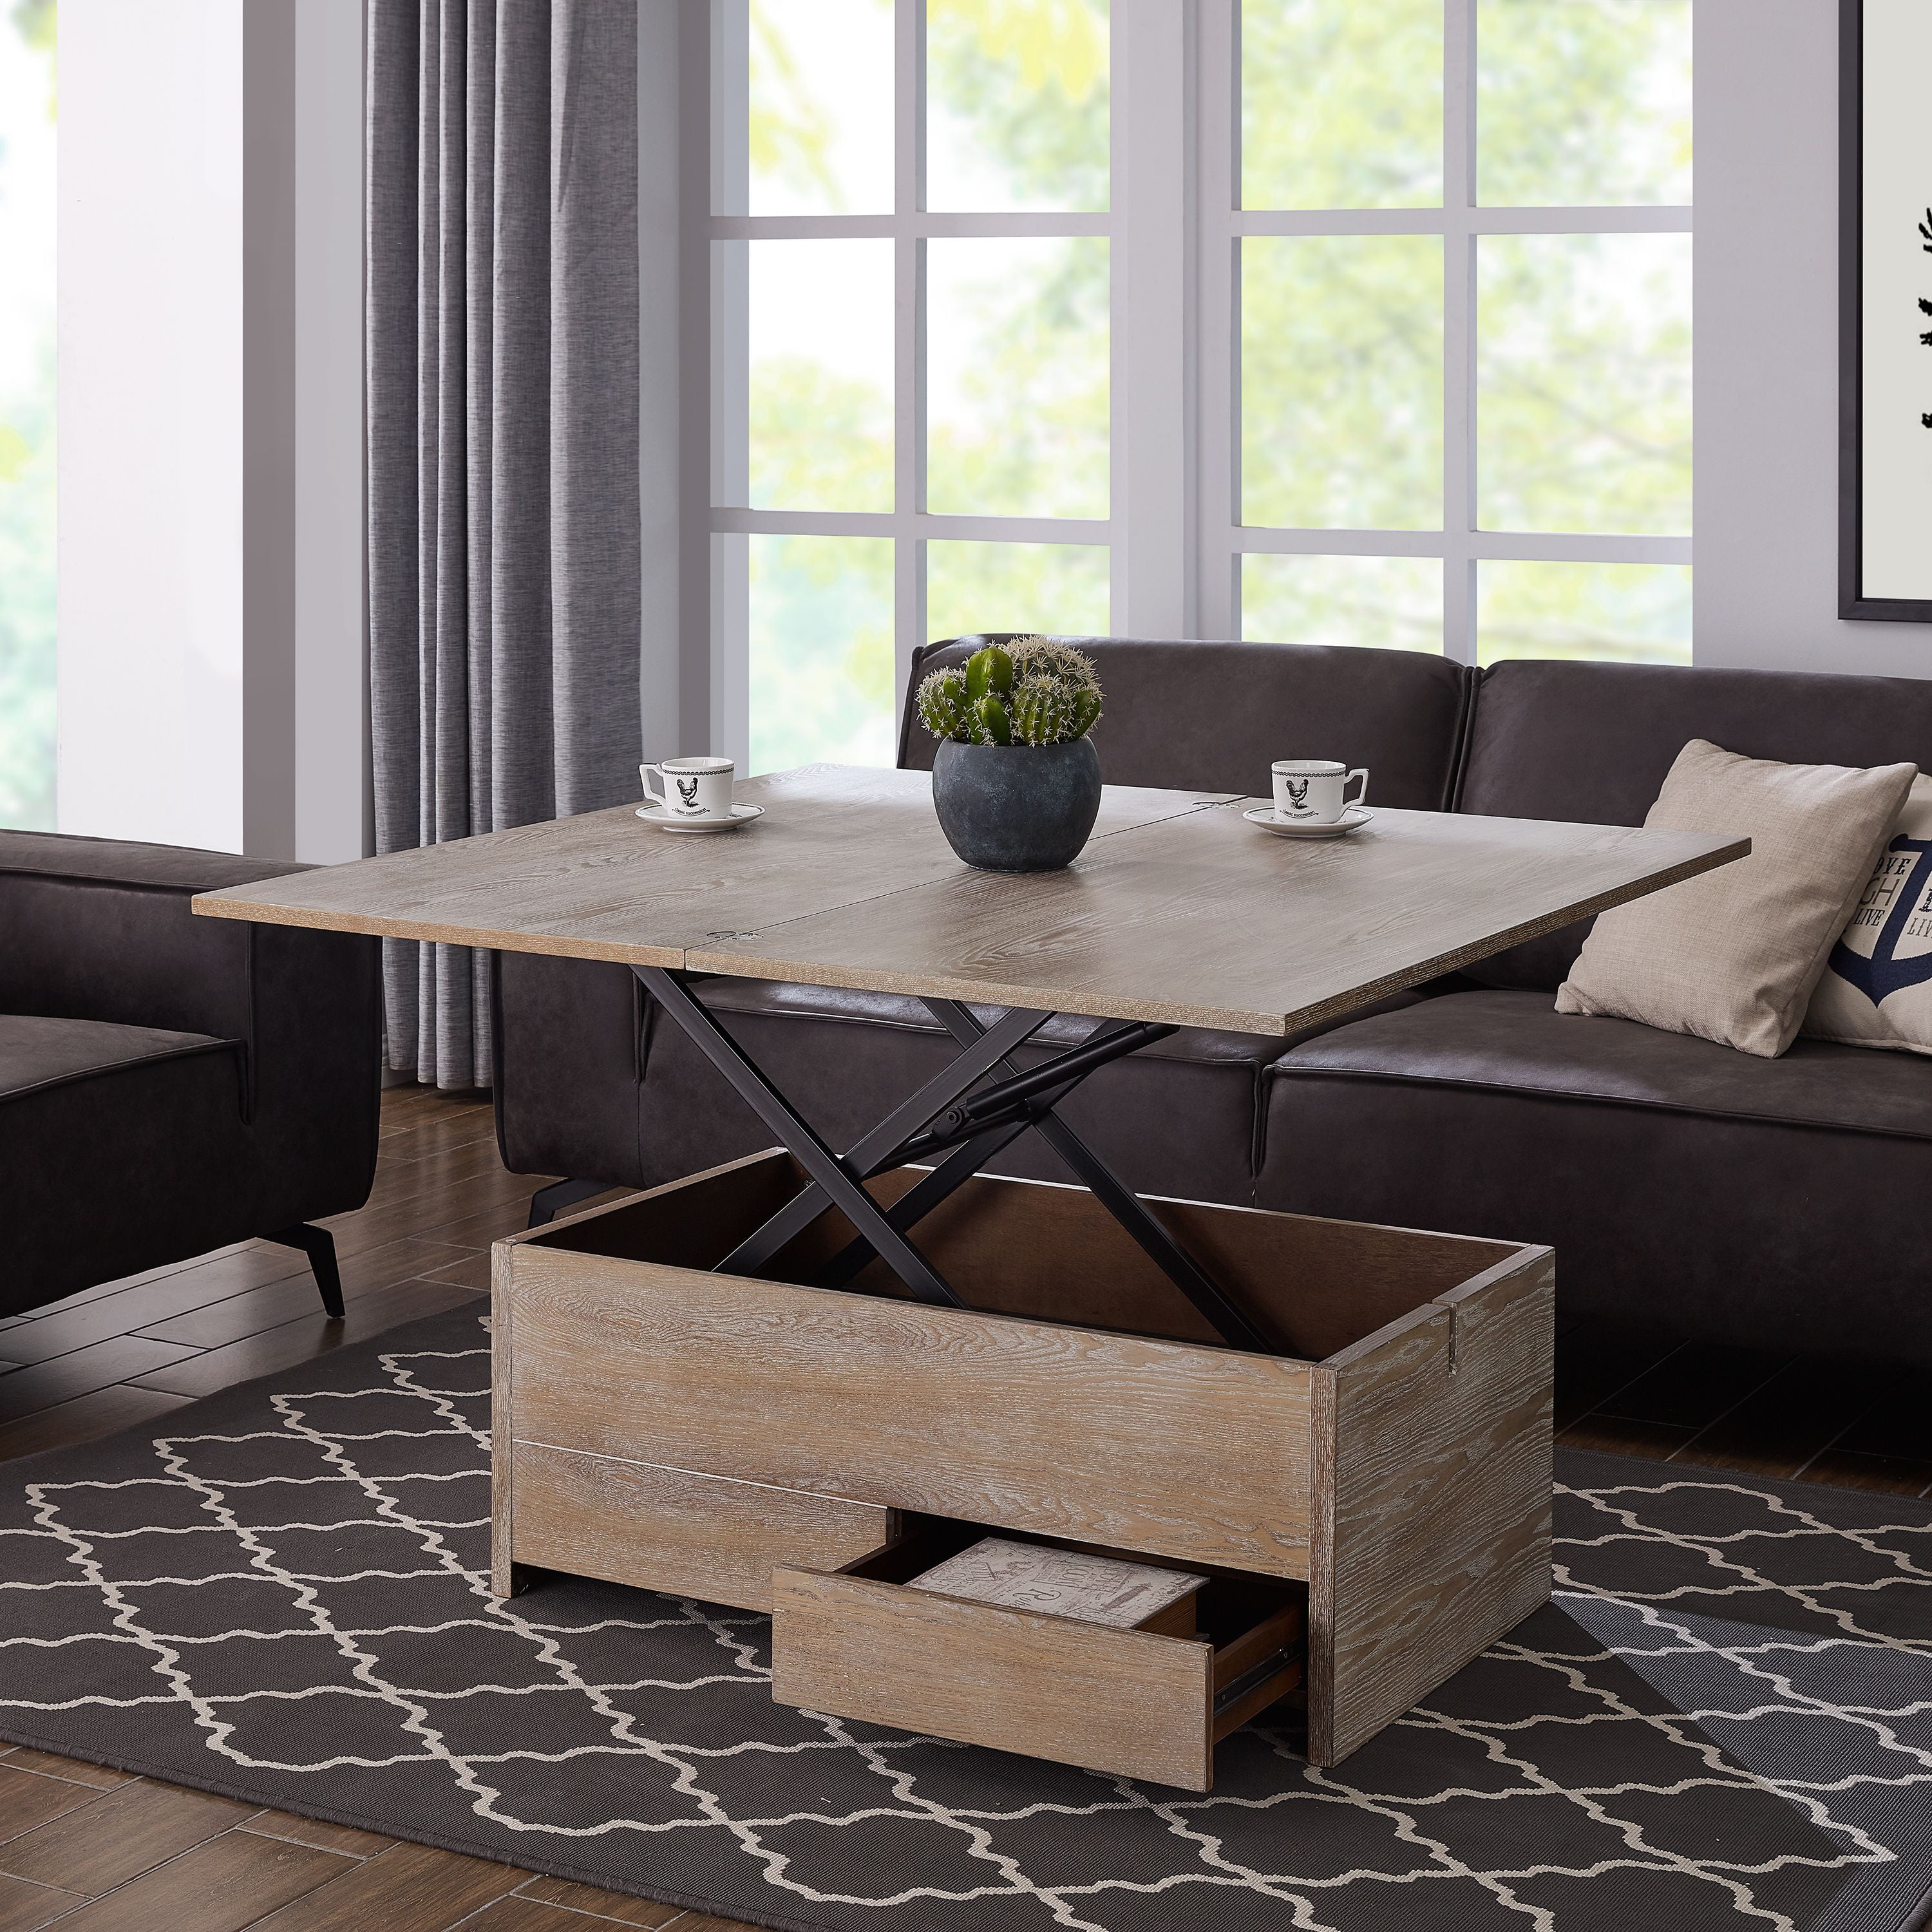 Find Amazing Convertible Dining Room Table
 For Your Home